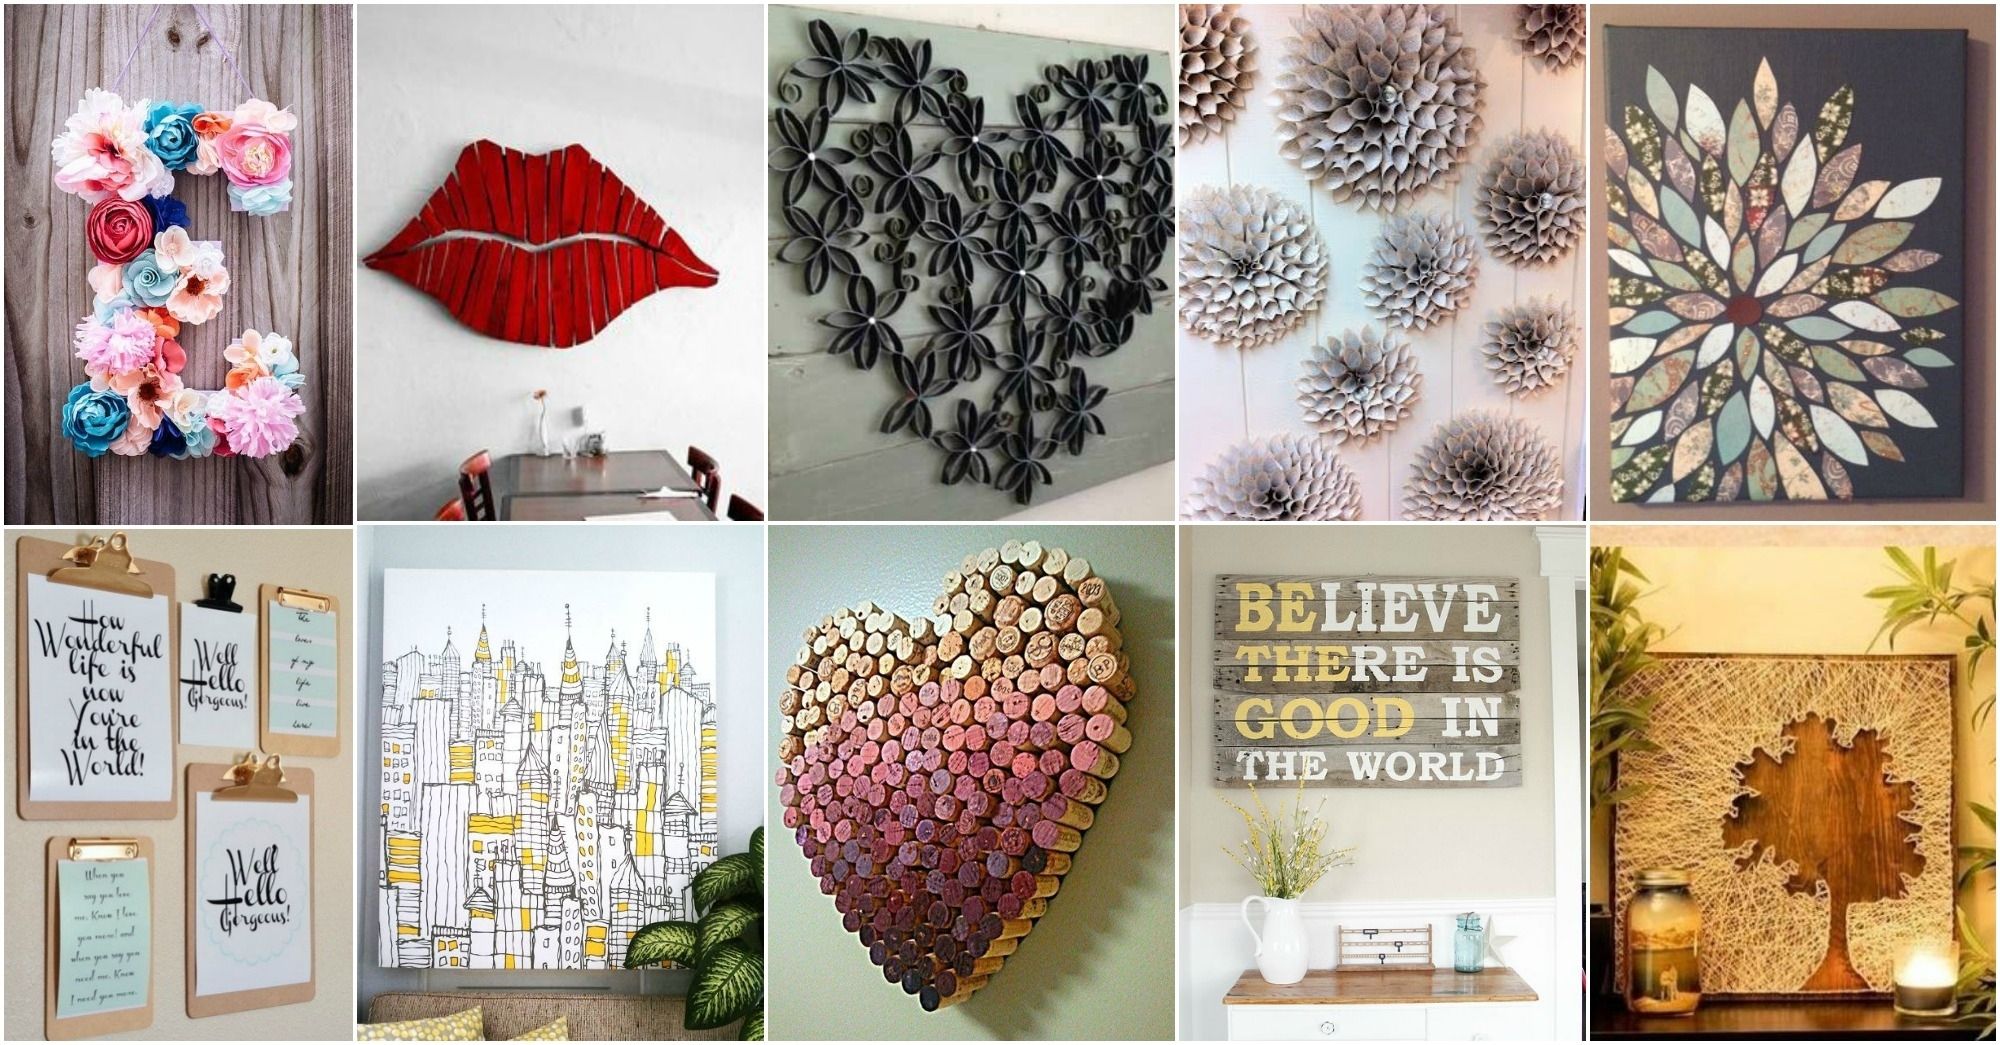 More Amazing Diy Wall Art Ideas With Regard To Diy Wall Art (View 11 of 20)